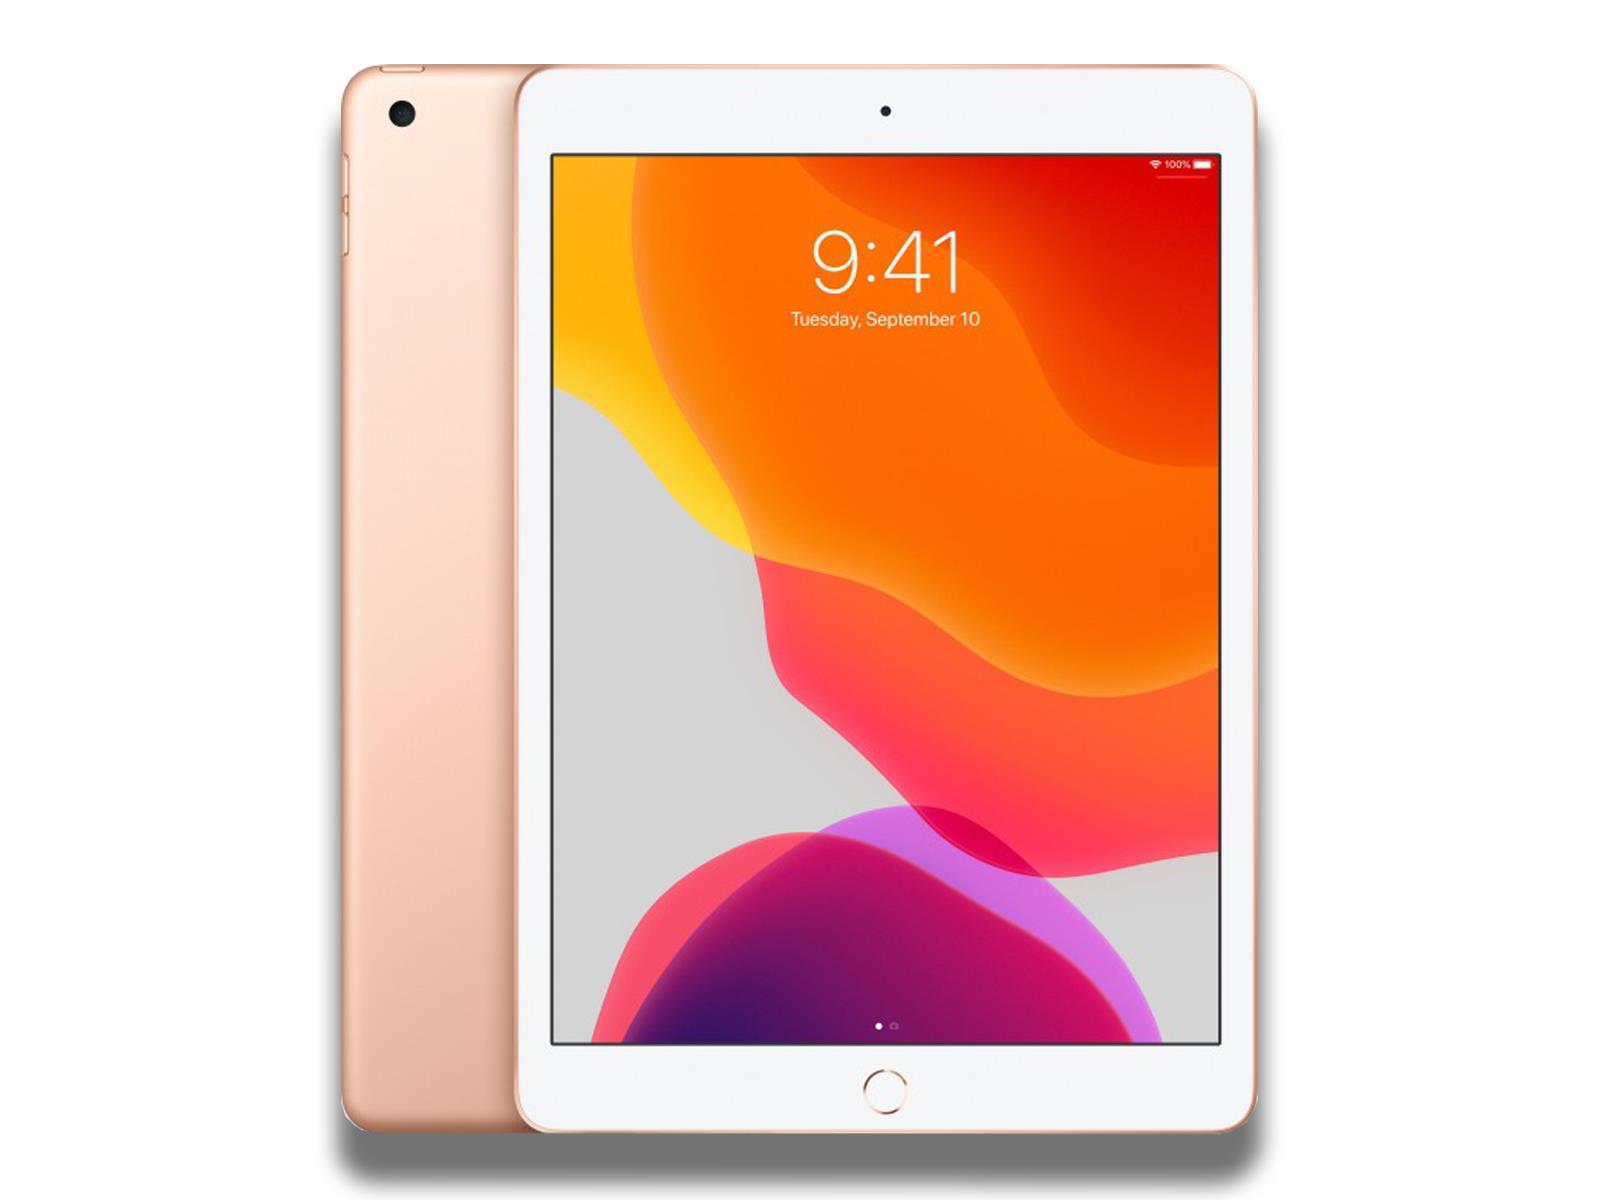 Image shows a front and back view of the Gold iPad 7th Gen